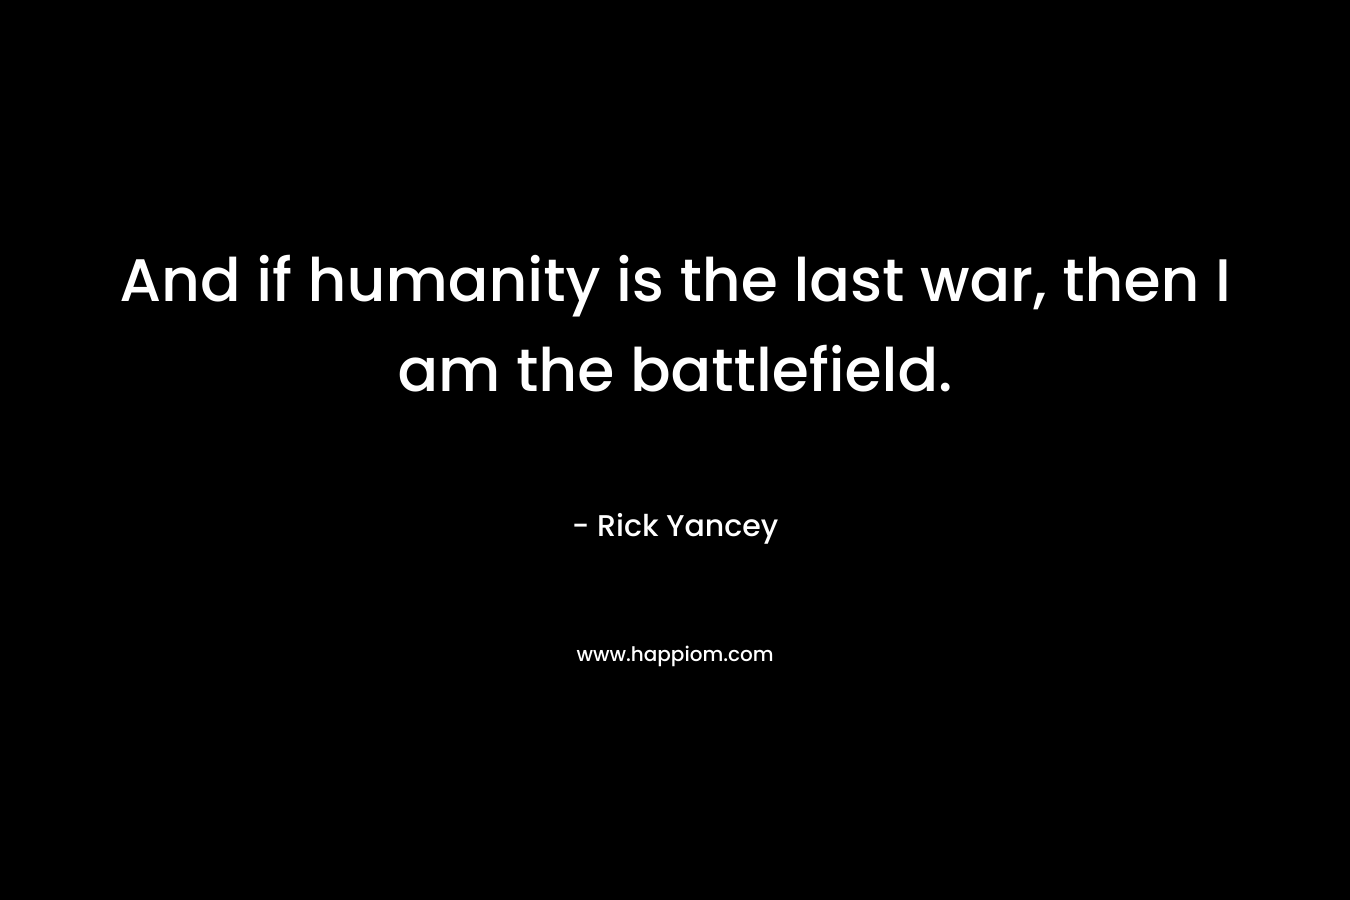 And if humanity is the last war, then I am the battlefield.